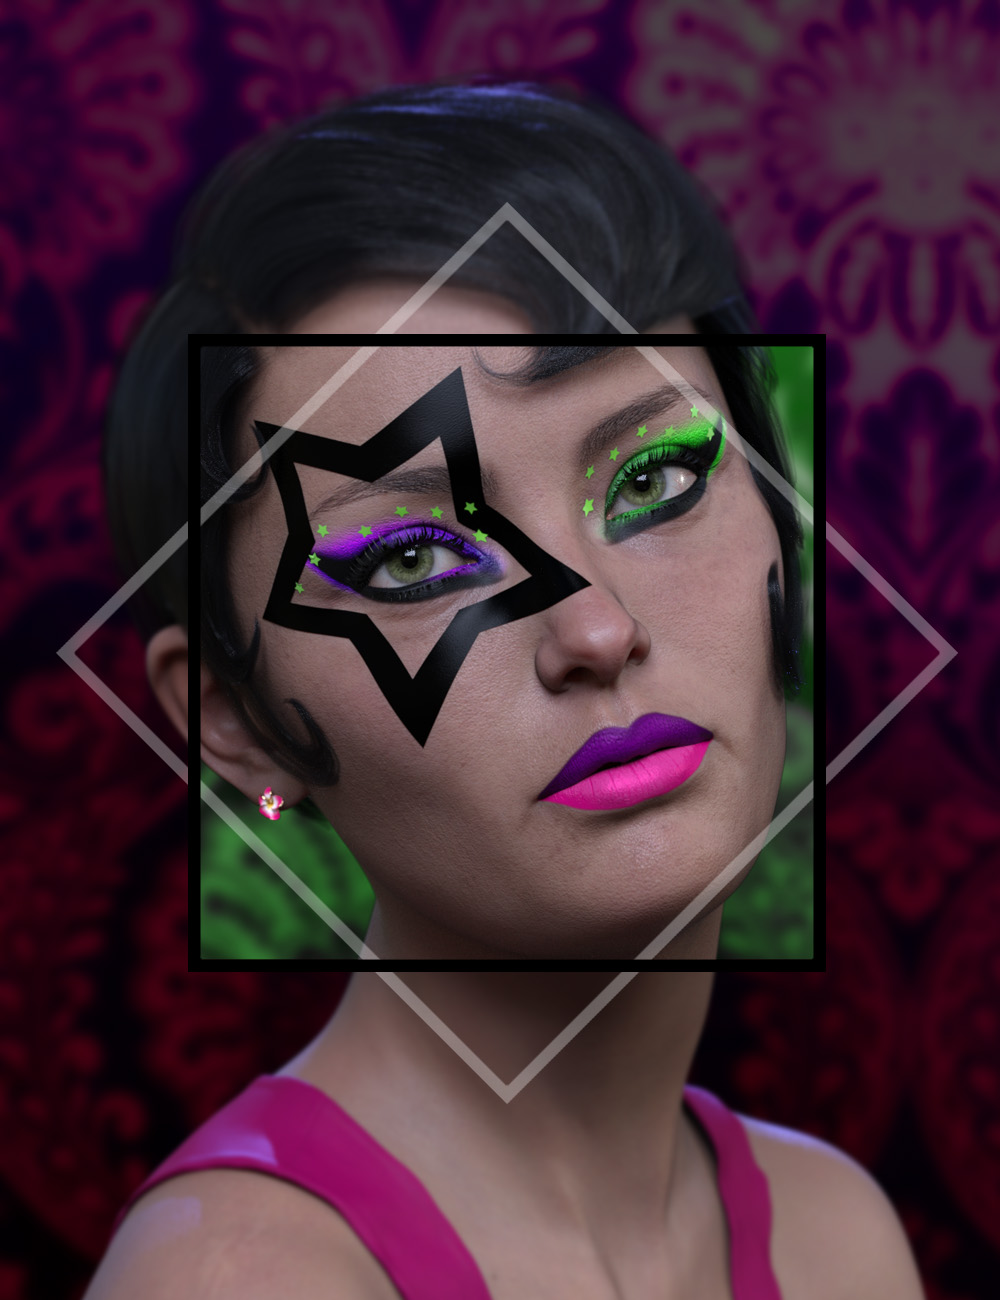 I Love the 80's Inspired Geoshell Make-Up Builder Merchant Resource for Genesis 8.1 Females by: ForbiddenWhisperschevybabe25, 3D Models by Daz 3D